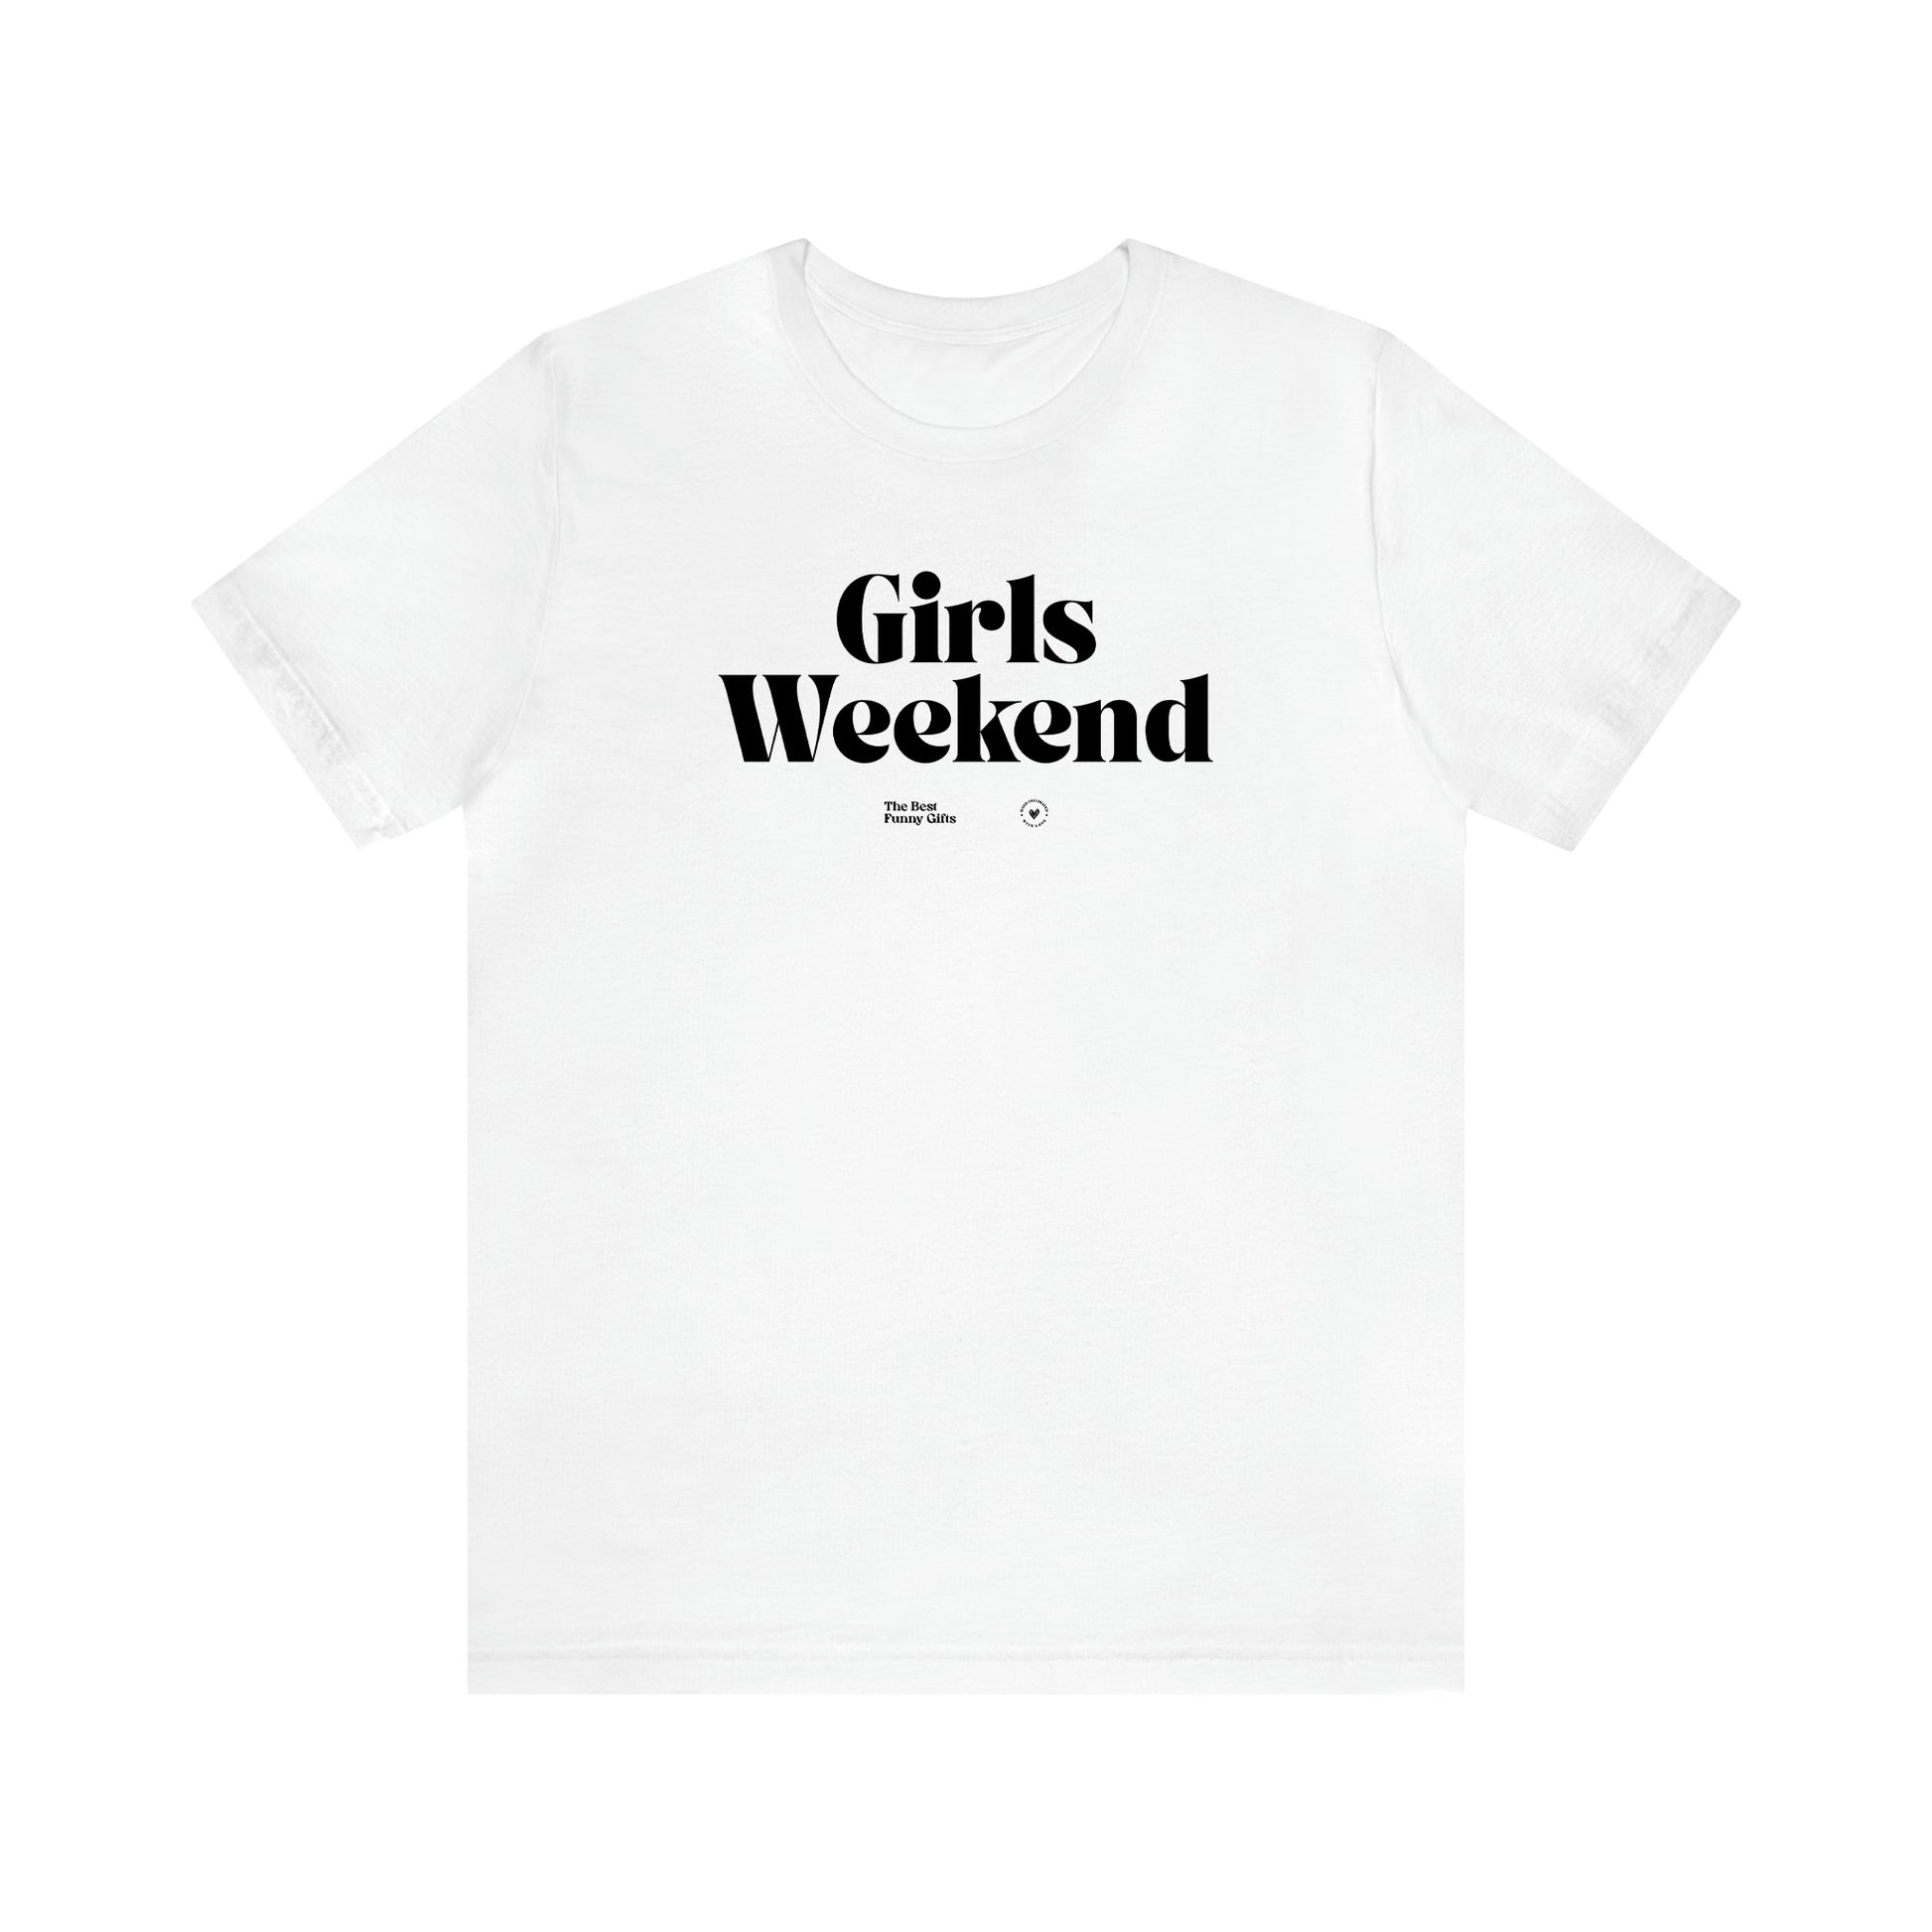 Women's T Shirts Girls Weekend - The Best Funny Gifts